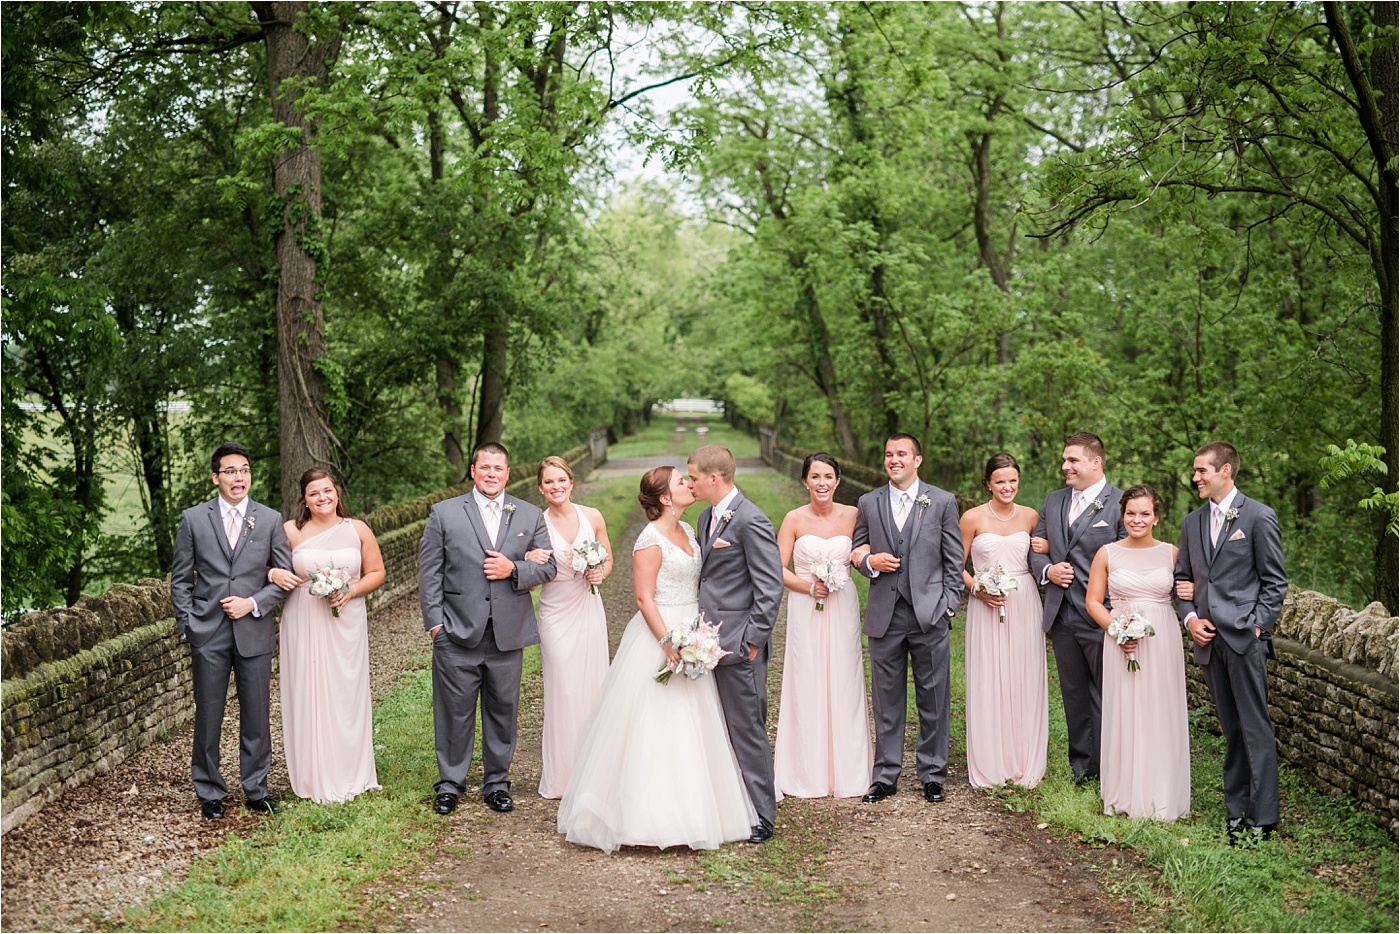 A Blush Outdoor wedding at Irongate Equestrian | KariMe Photography_0117